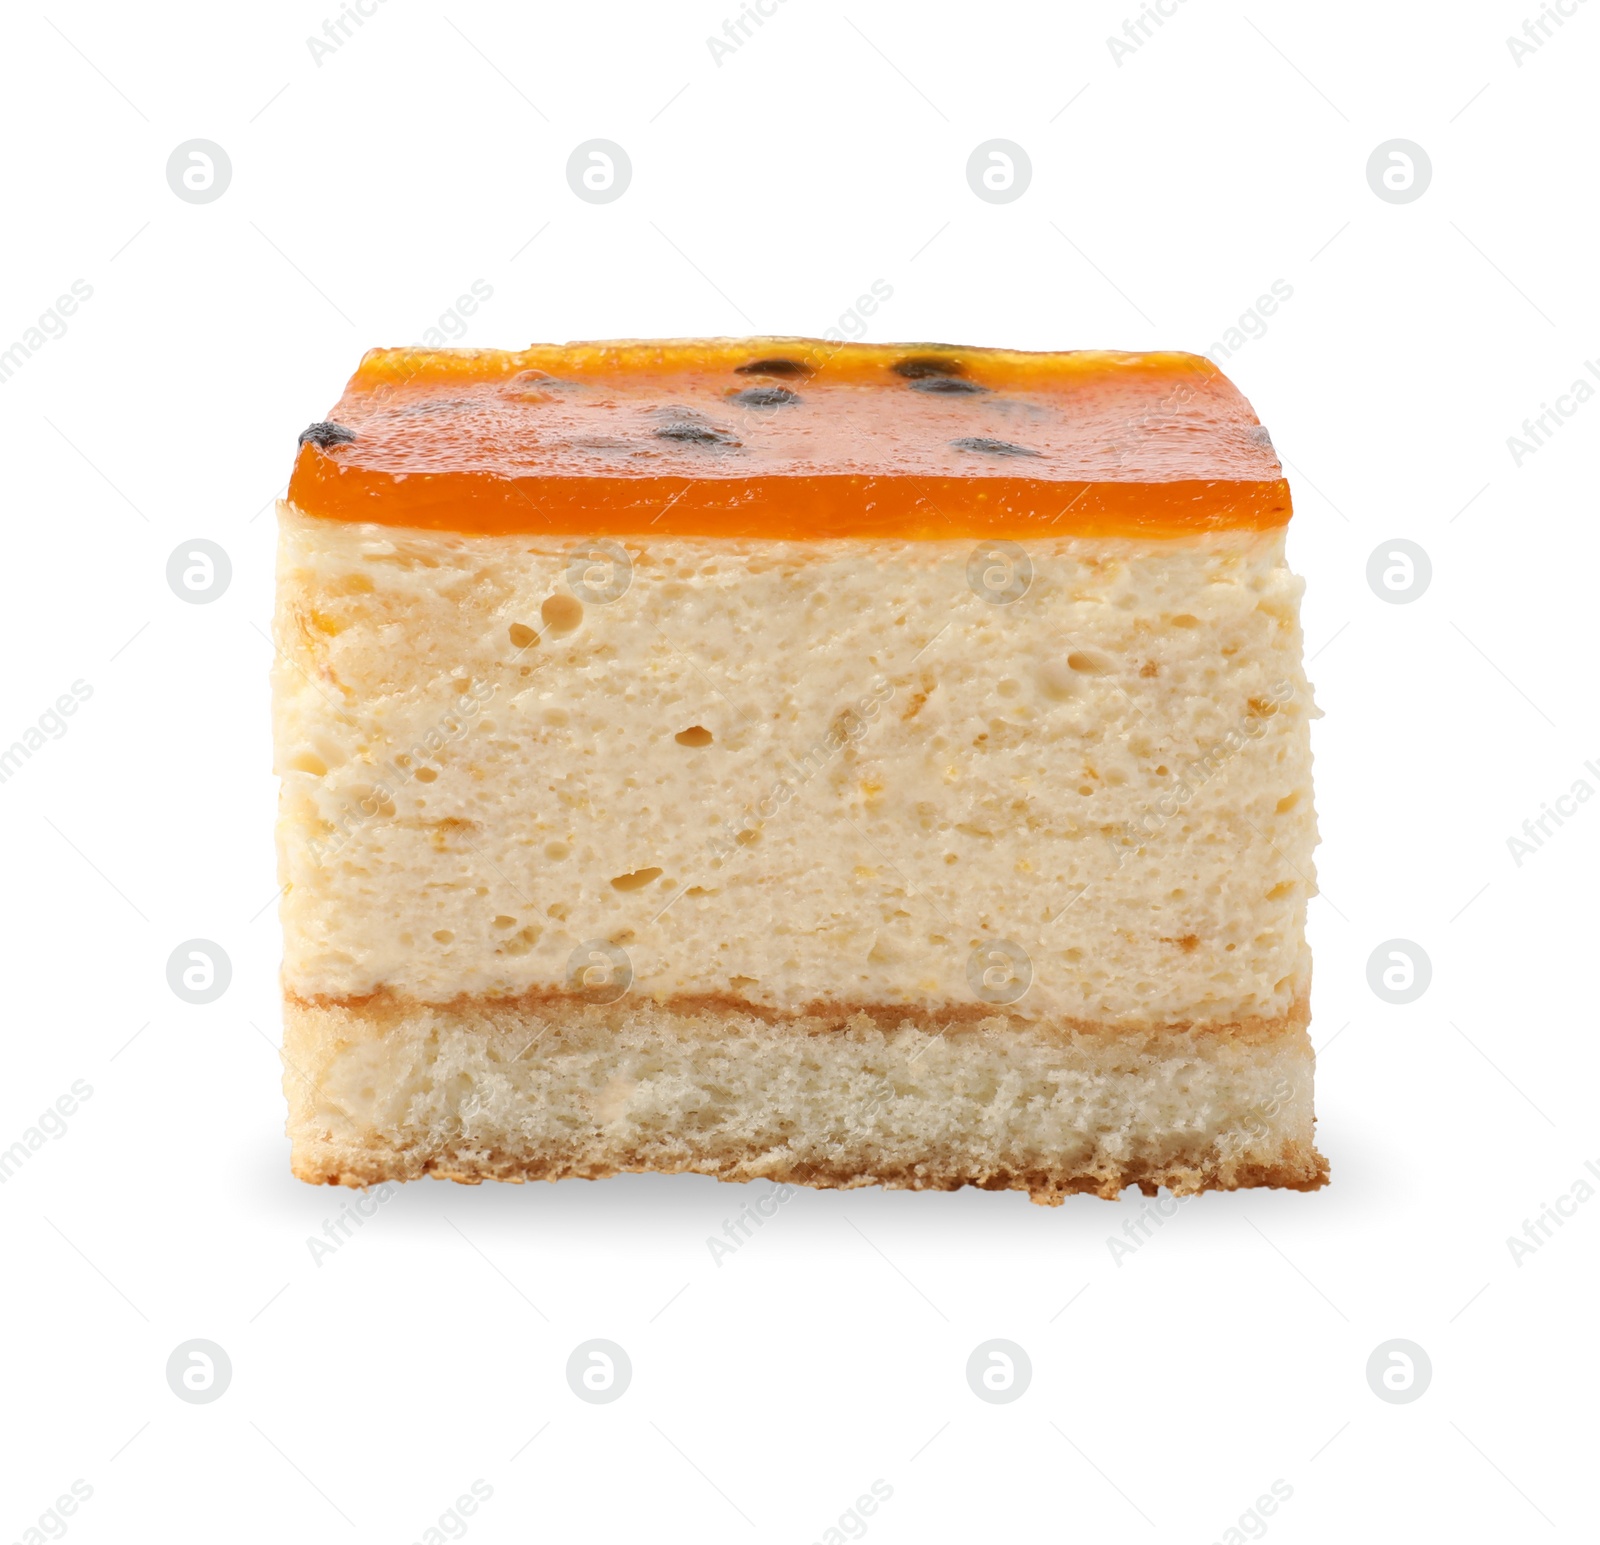 Photo of Piece of cheesecake with jelly on white background